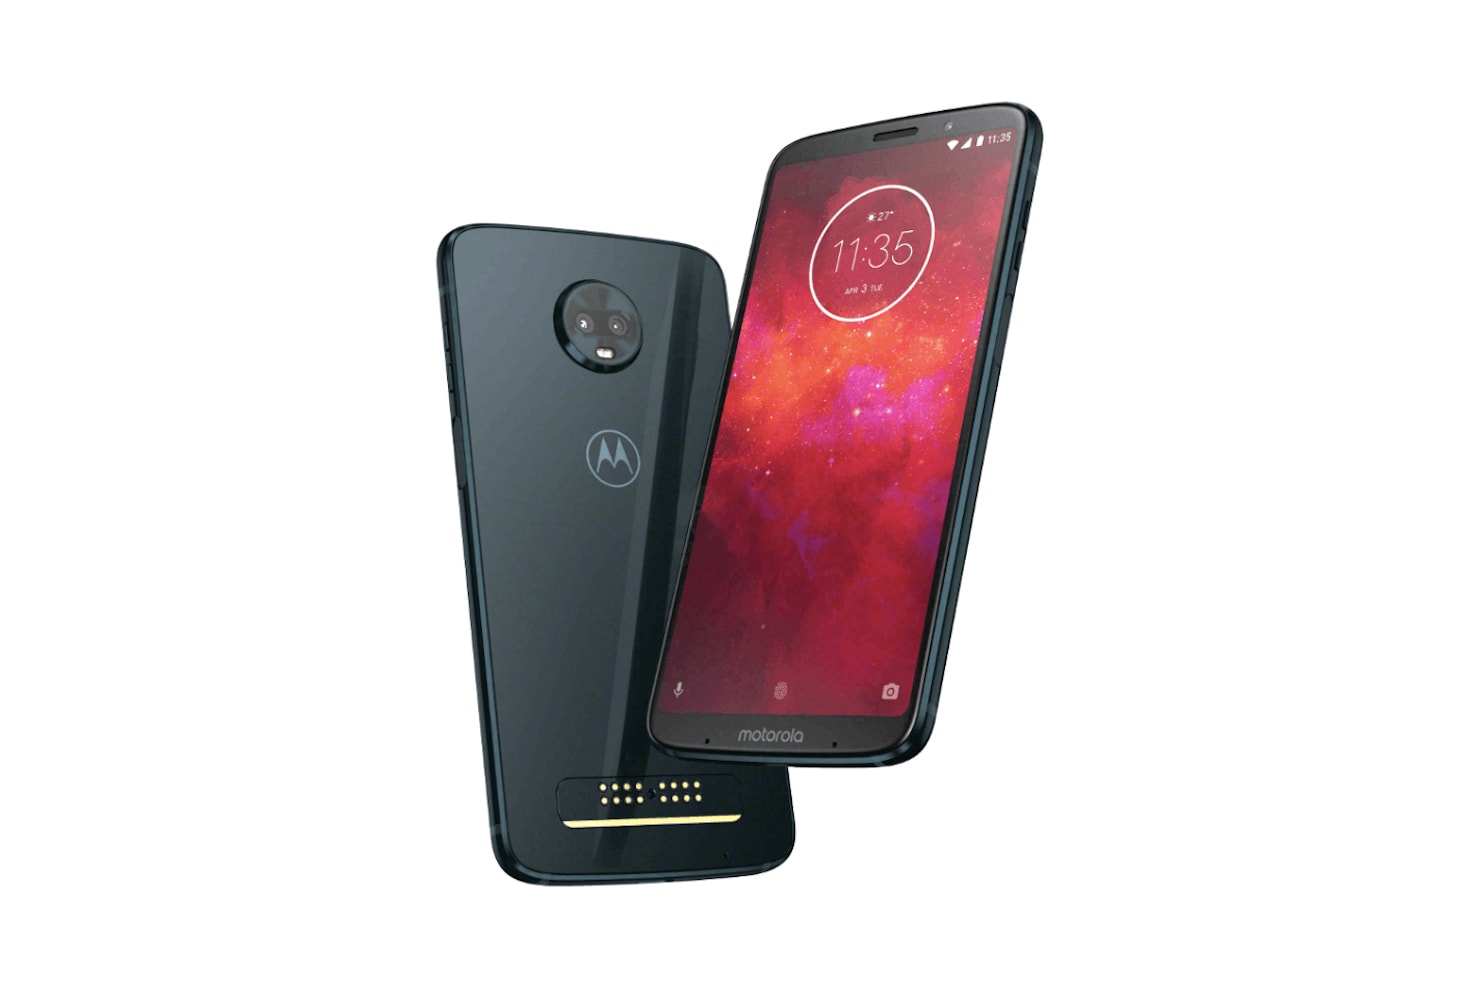 Moto Z3 Play Official Images Surfaced Leak Motorola Affordable Phone Samsung LG iPhone X Apple